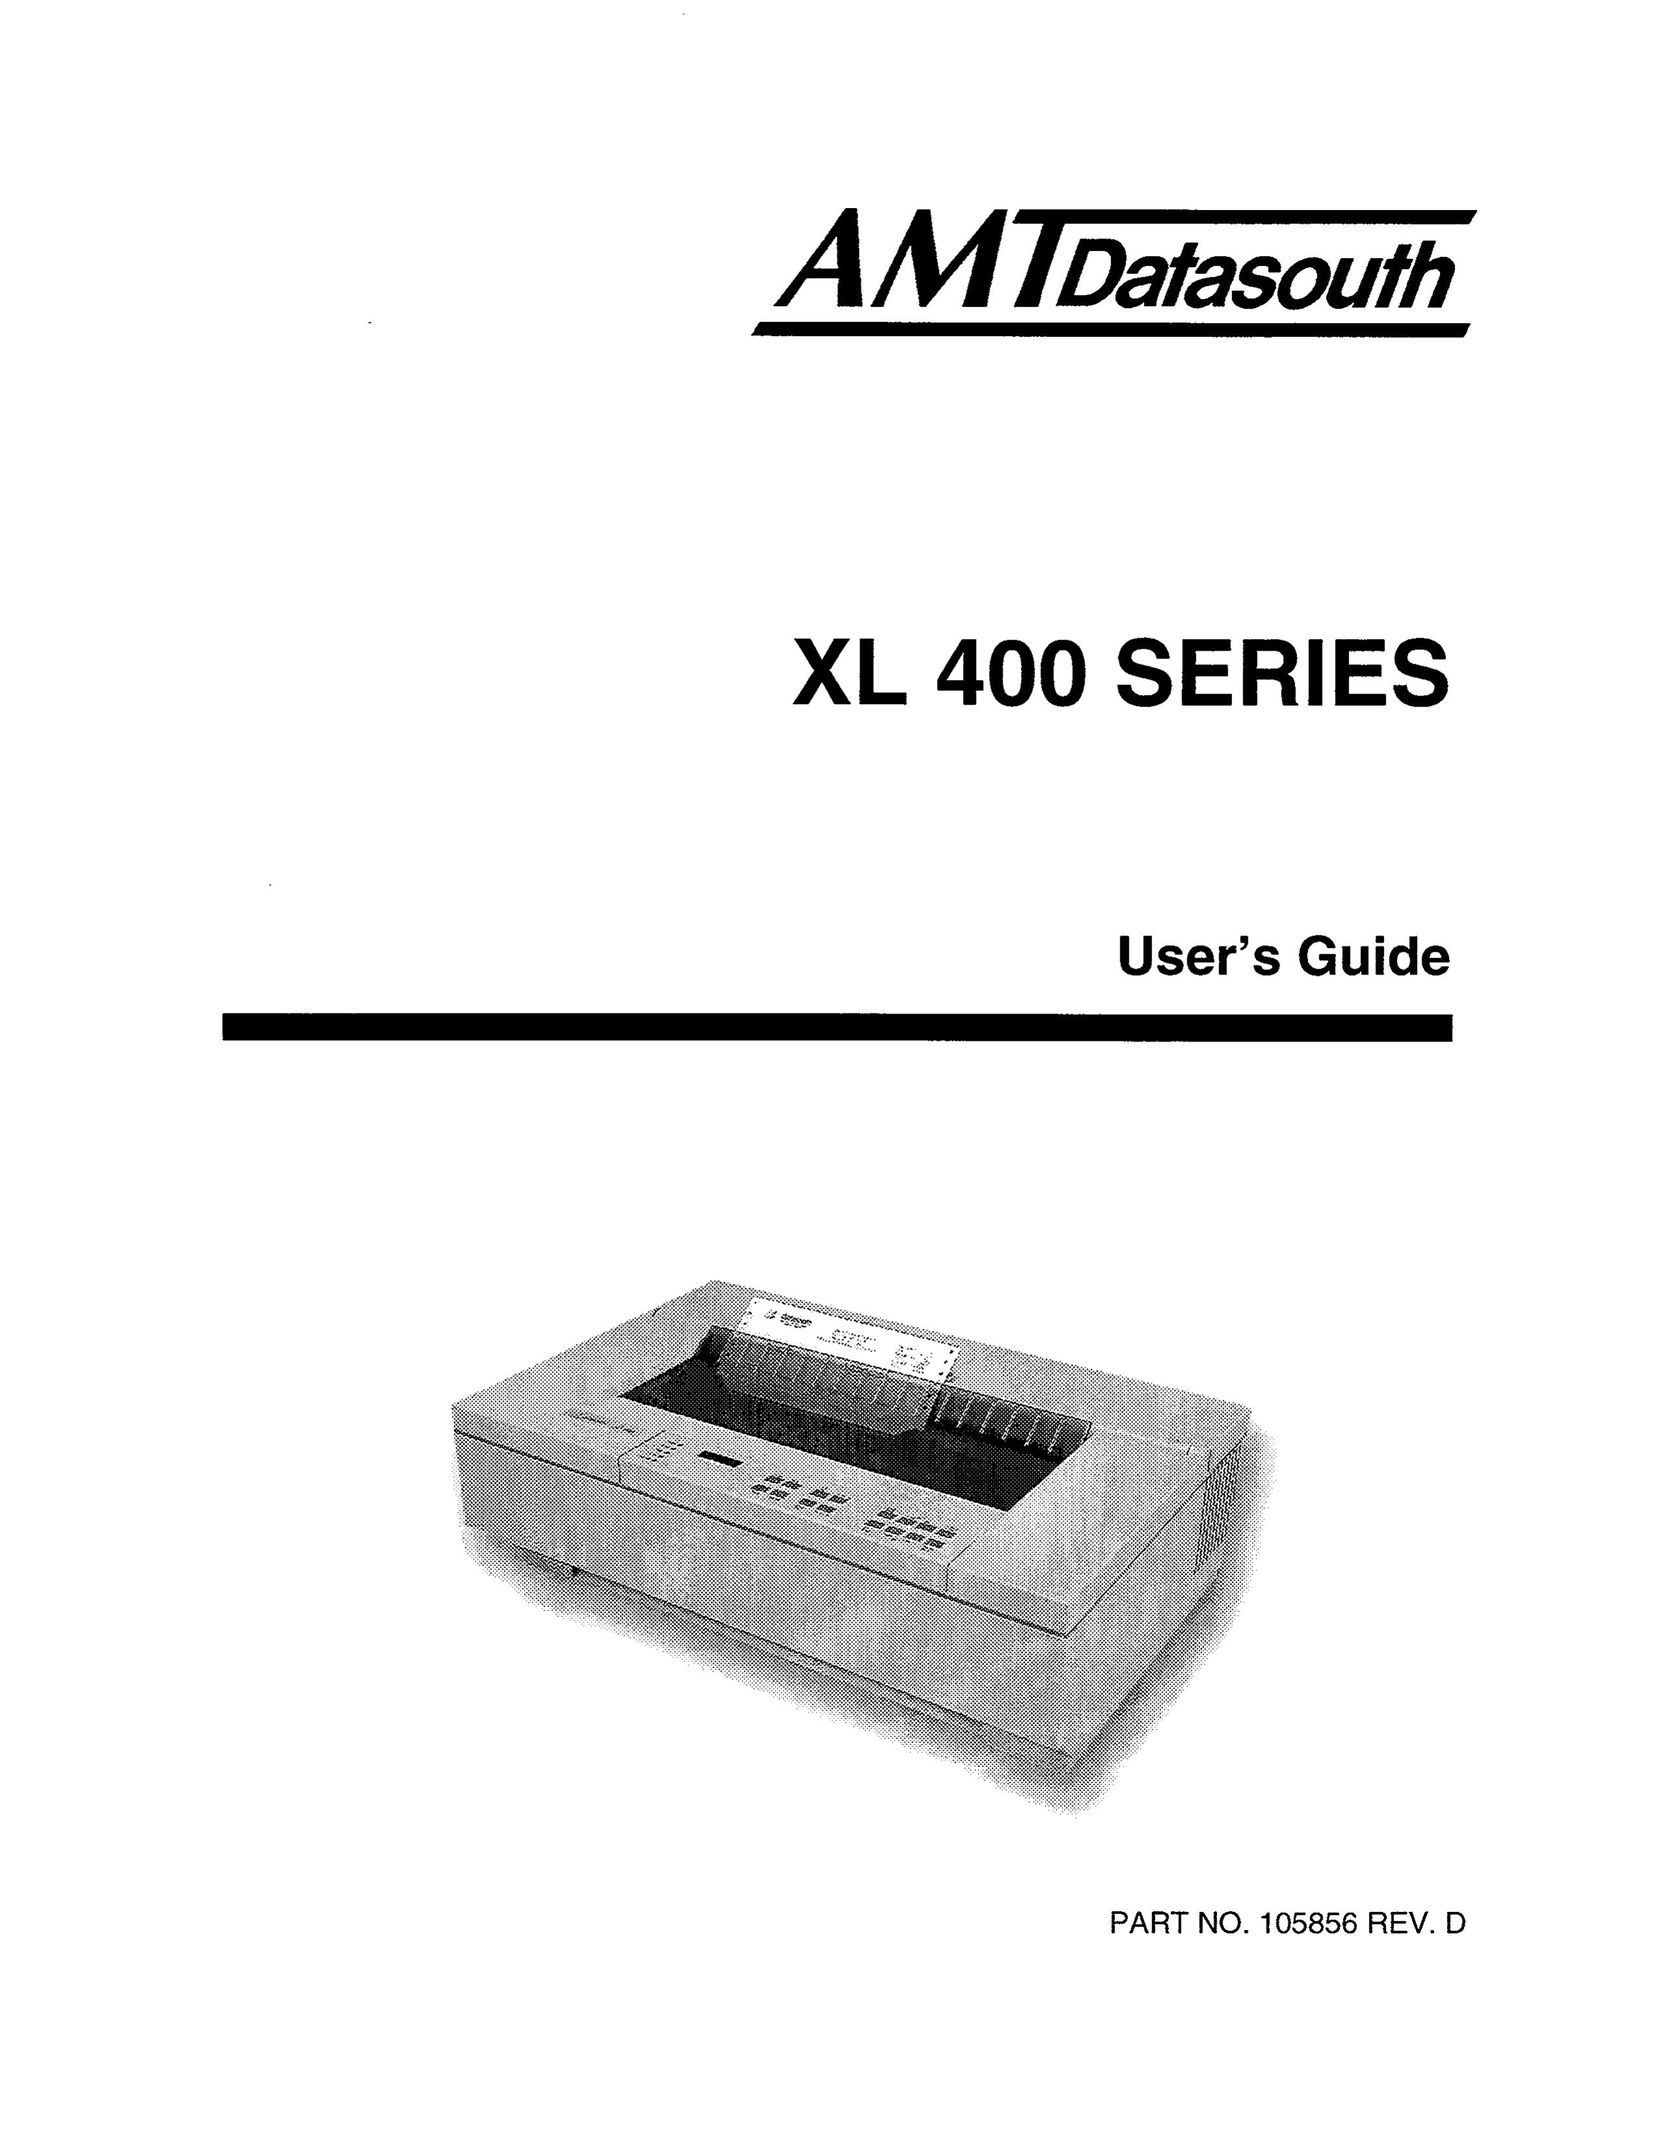 AMT Datasouth MS1839AVCC All in One Printer User Manual